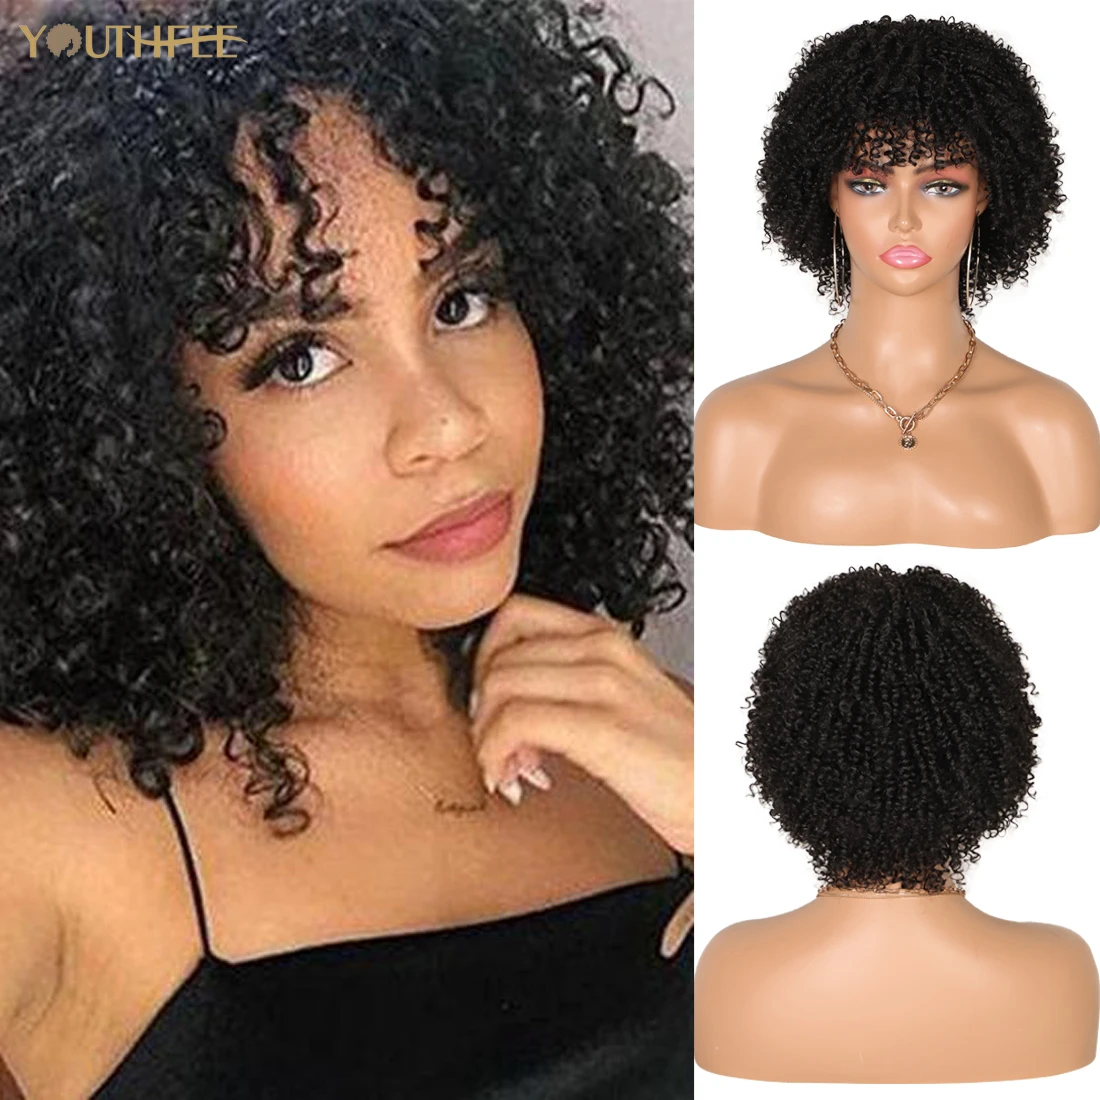 

Youthfee 6 Inches Afro Kinky Curly Full Wigs With Bangs Short Bob Curly Synthetic Machine Wigs For Black Women